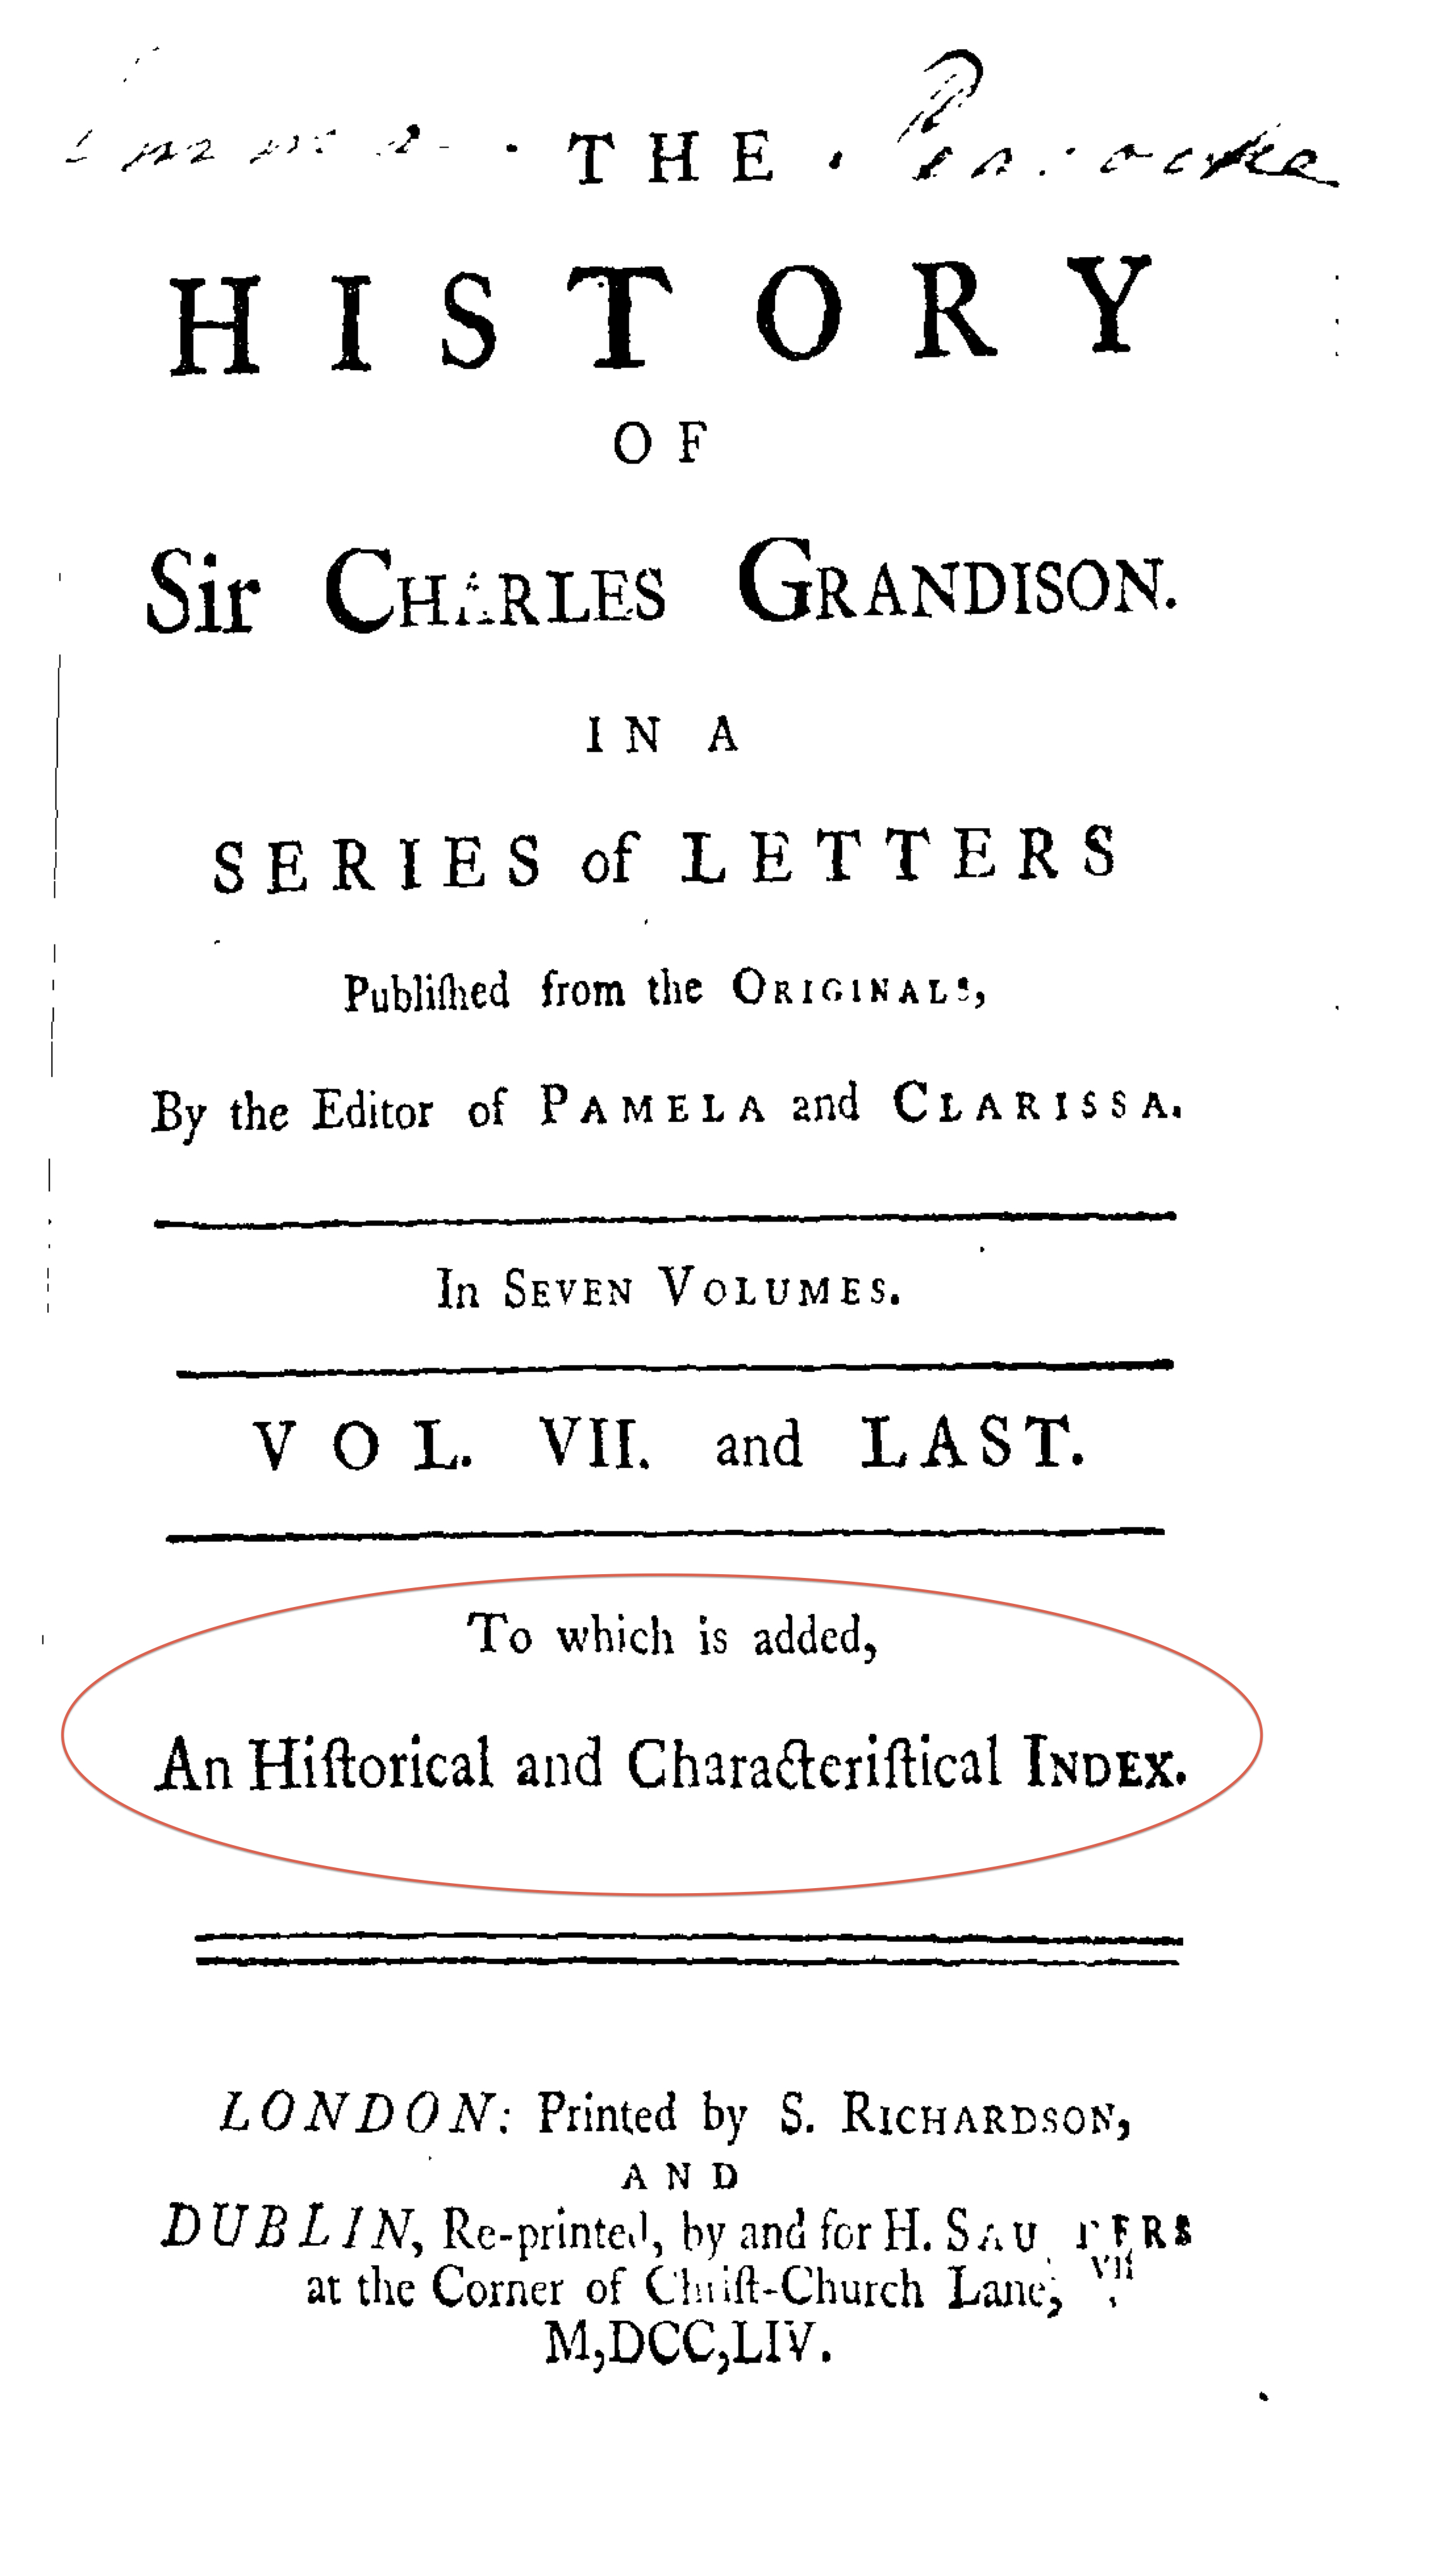 Title Page of The History of Sir Charles Grandison, Dublin reprint